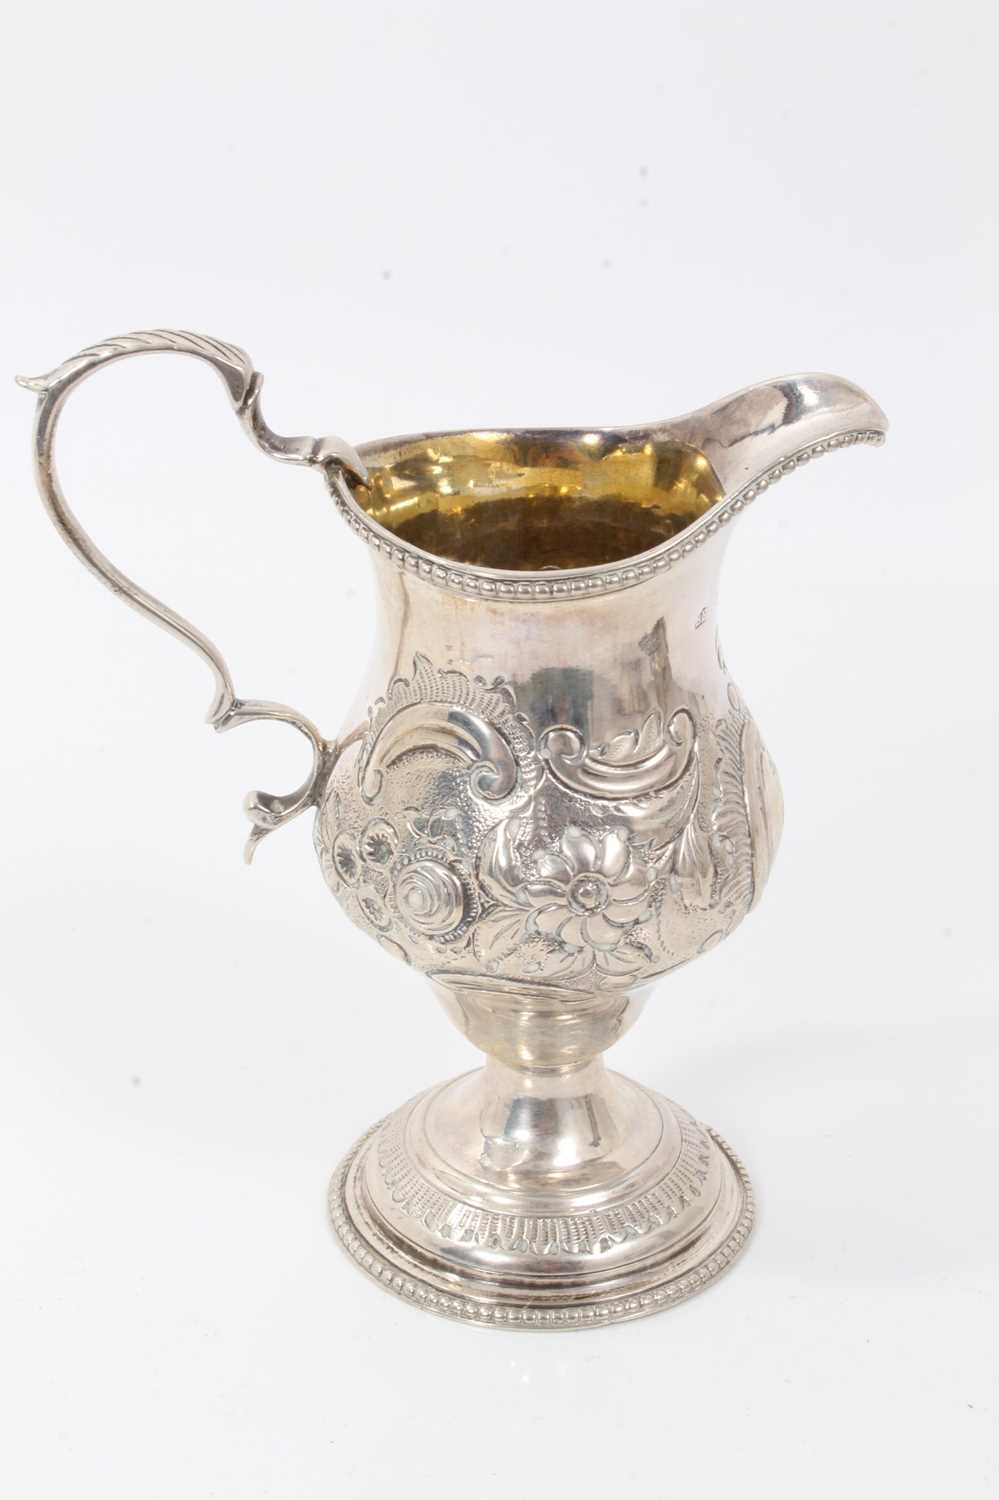 George III silver cream jug with engraved coronet and monogram - Image 3 of 6